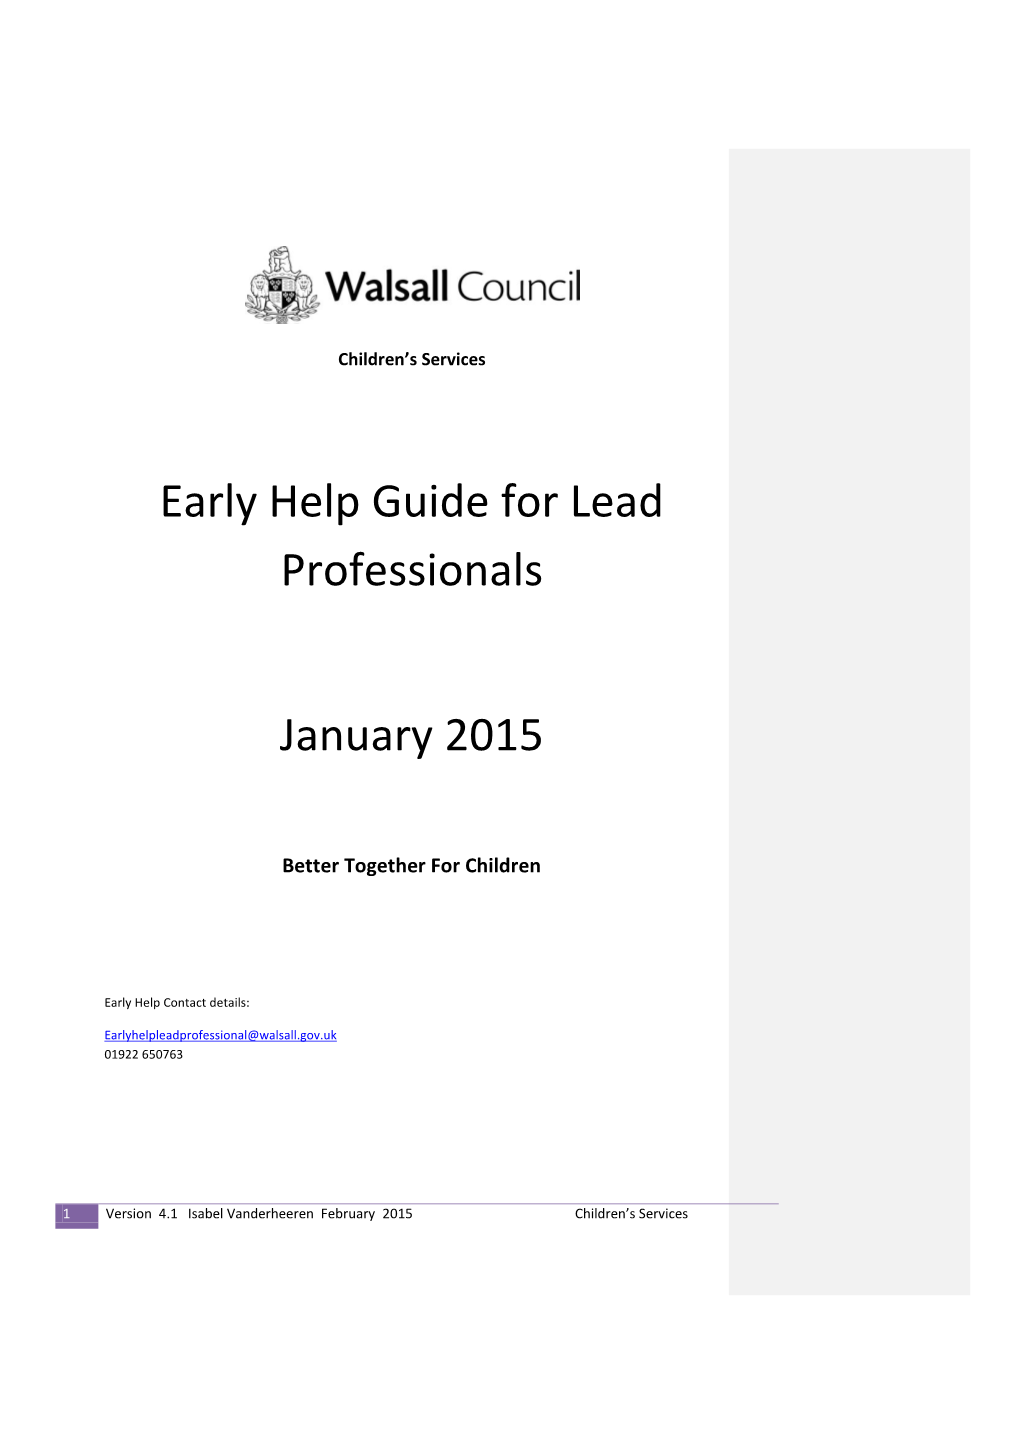 Early Help Guide for Lead Professionals January 2015